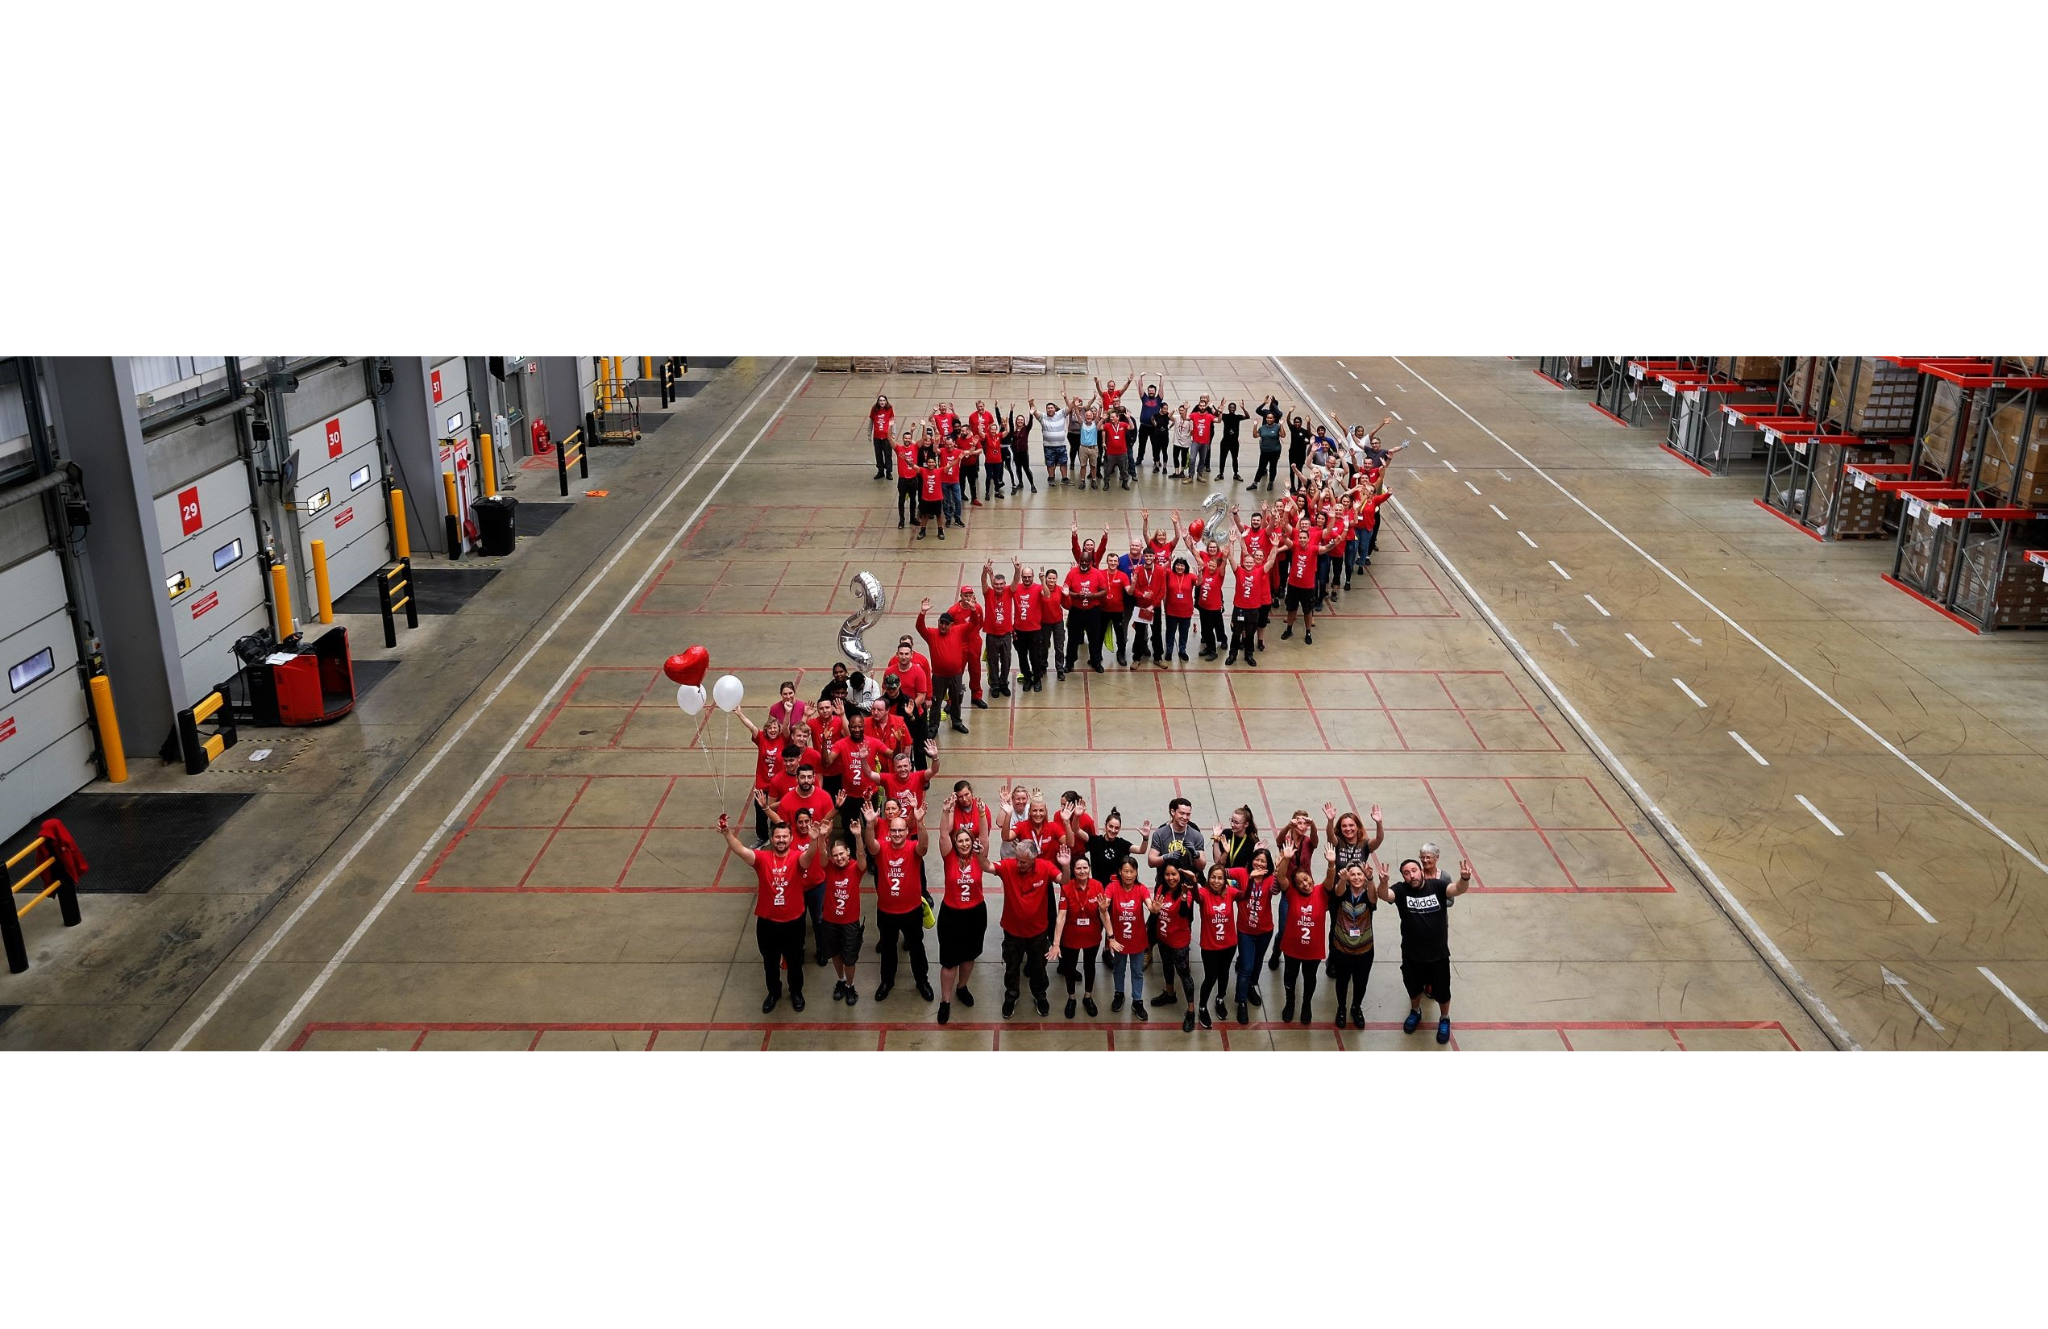 Corby warehouse team stood in 2 formation